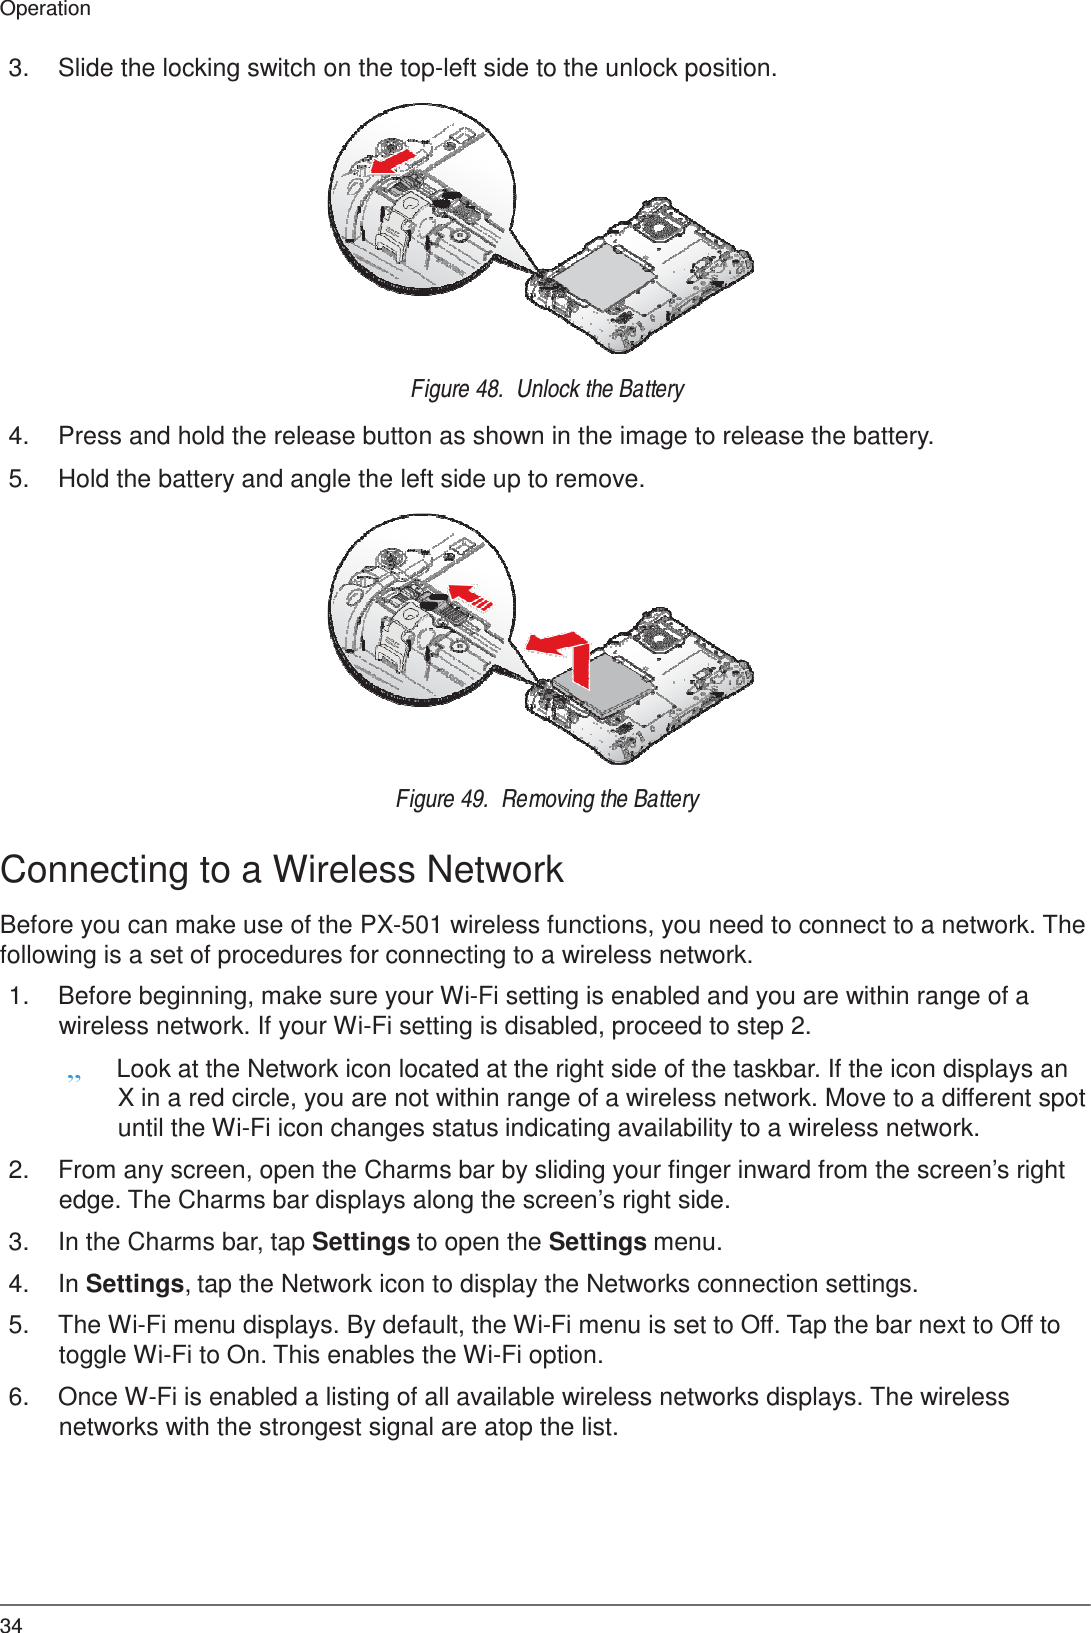 34 Operation    3.  Slide the locking switch on the top-left side to the unlock position.               Figure 48.  Unlock the Battery  4.  Press and hold the release button as shown in the image to release the battery.  5.  Hold the battery and angle the left side up to remove.               Figure 49.  Removing the Battery   Connecting to a Wireless Network  Before you can make use of the PX-501 wireless functions, you need to connect to a network. The following is a set of procedures for connecting to a wireless network.  1.  Before beginning, make sure your Wi-Fi setting is enabled and you are within range of a wireless network. If your Wi-Fi setting is disabled, proceed to step 2. „ Look at the Network icon located at the right side of the taskbar. If the icon displays an X in a red circle, you are not within range of a wireless network. Move to a different spot until the Wi-Fi icon changes status indicating availability to a wireless network.  2.  From any screen, open the Charms bar by sliding your finger inward from the screen’s right edge. The Charms bar displays along the screen’s right side.  3.  In the Charms bar, tap Settings to open the Settings menu.  4.  In Settings, tap the Network icon to display the Networks connection settings.  5.  The Wi-Fi menu displays. By default, the Wi-Fi menu is set to Off. Tap the bar next to Off to toggle Wi-Fi to On. This enables the Wi-Fi option.  6.  Once W-Fi is enabled a listing of all available wireless networks displays. The wireless networks with the strongest signal are atop the list. 